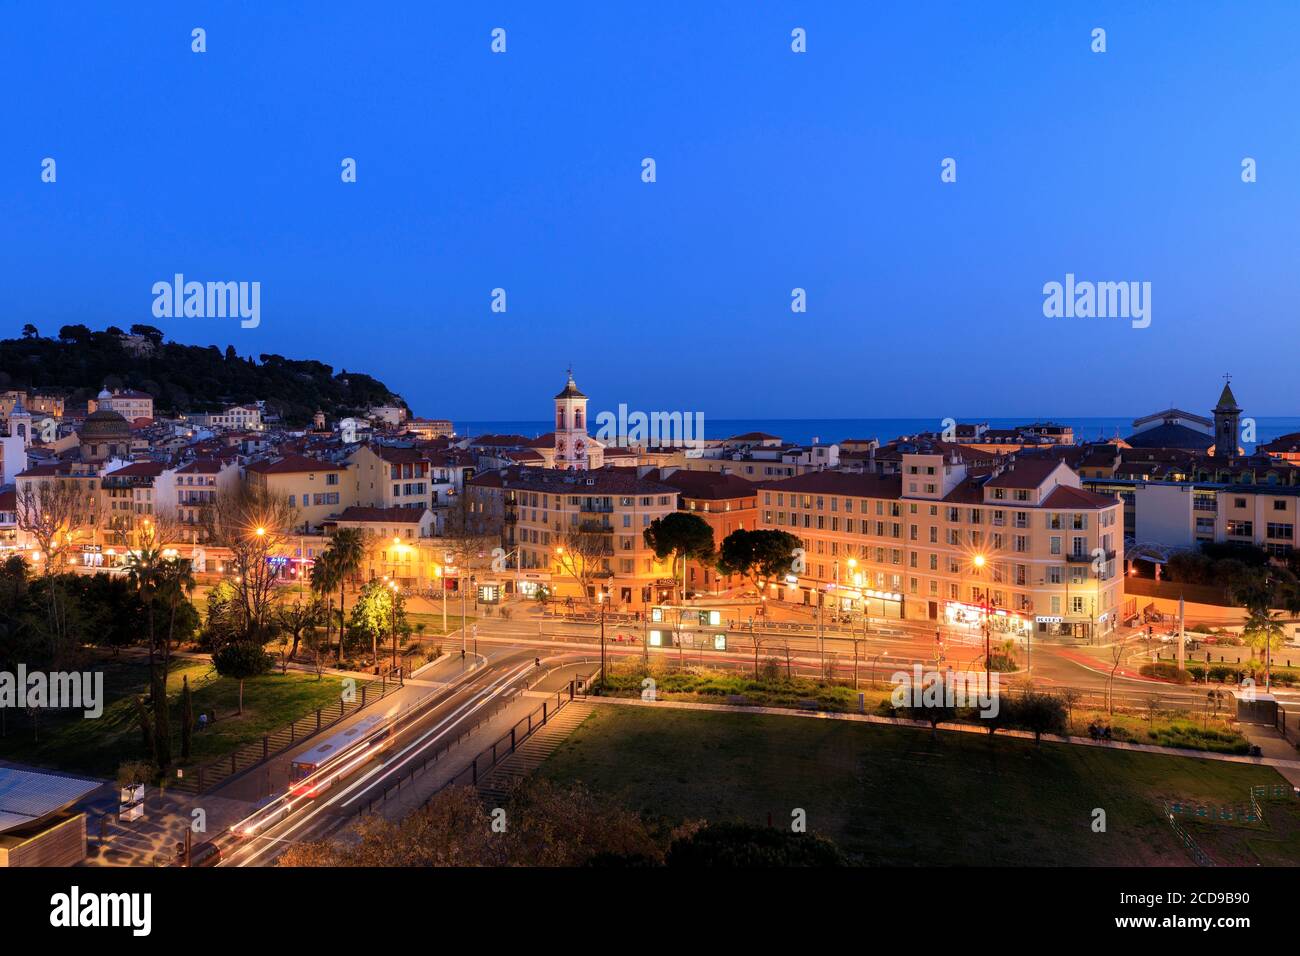 France, Alpes Maritimes, Nice, Promenade du Paillon, Avenue Felix Faure, Clock Tower and the Mediterranean Sea in the background Stock Photo